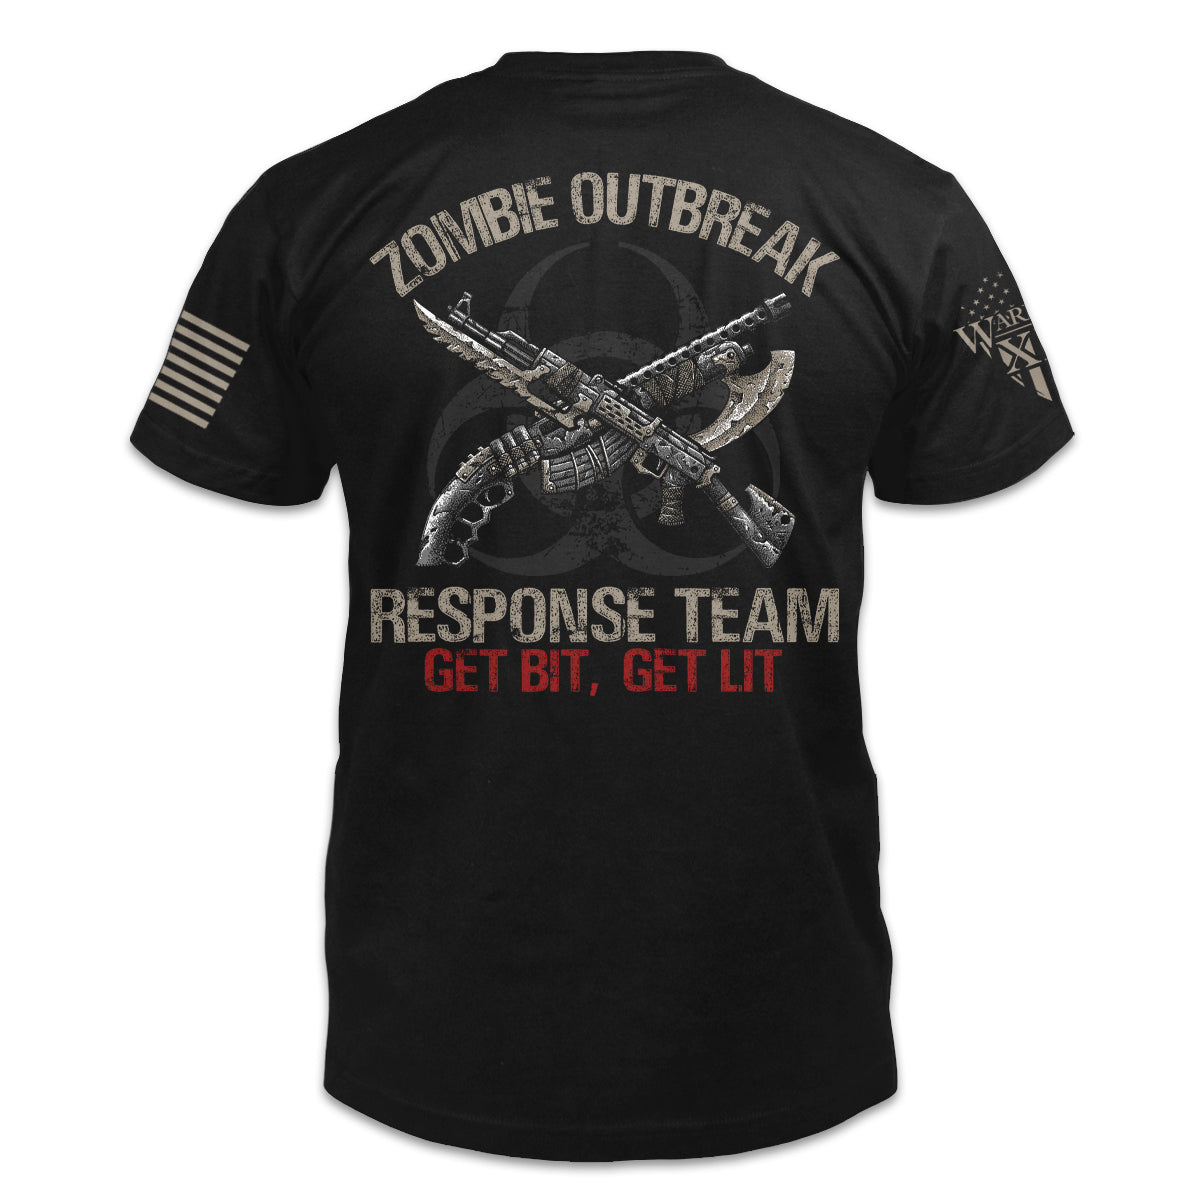 A black t-shirt with the words "Zombie Outbreak Response Team - Get Bit, Get Lit" and two guns with knives printed on the back of the shirt.